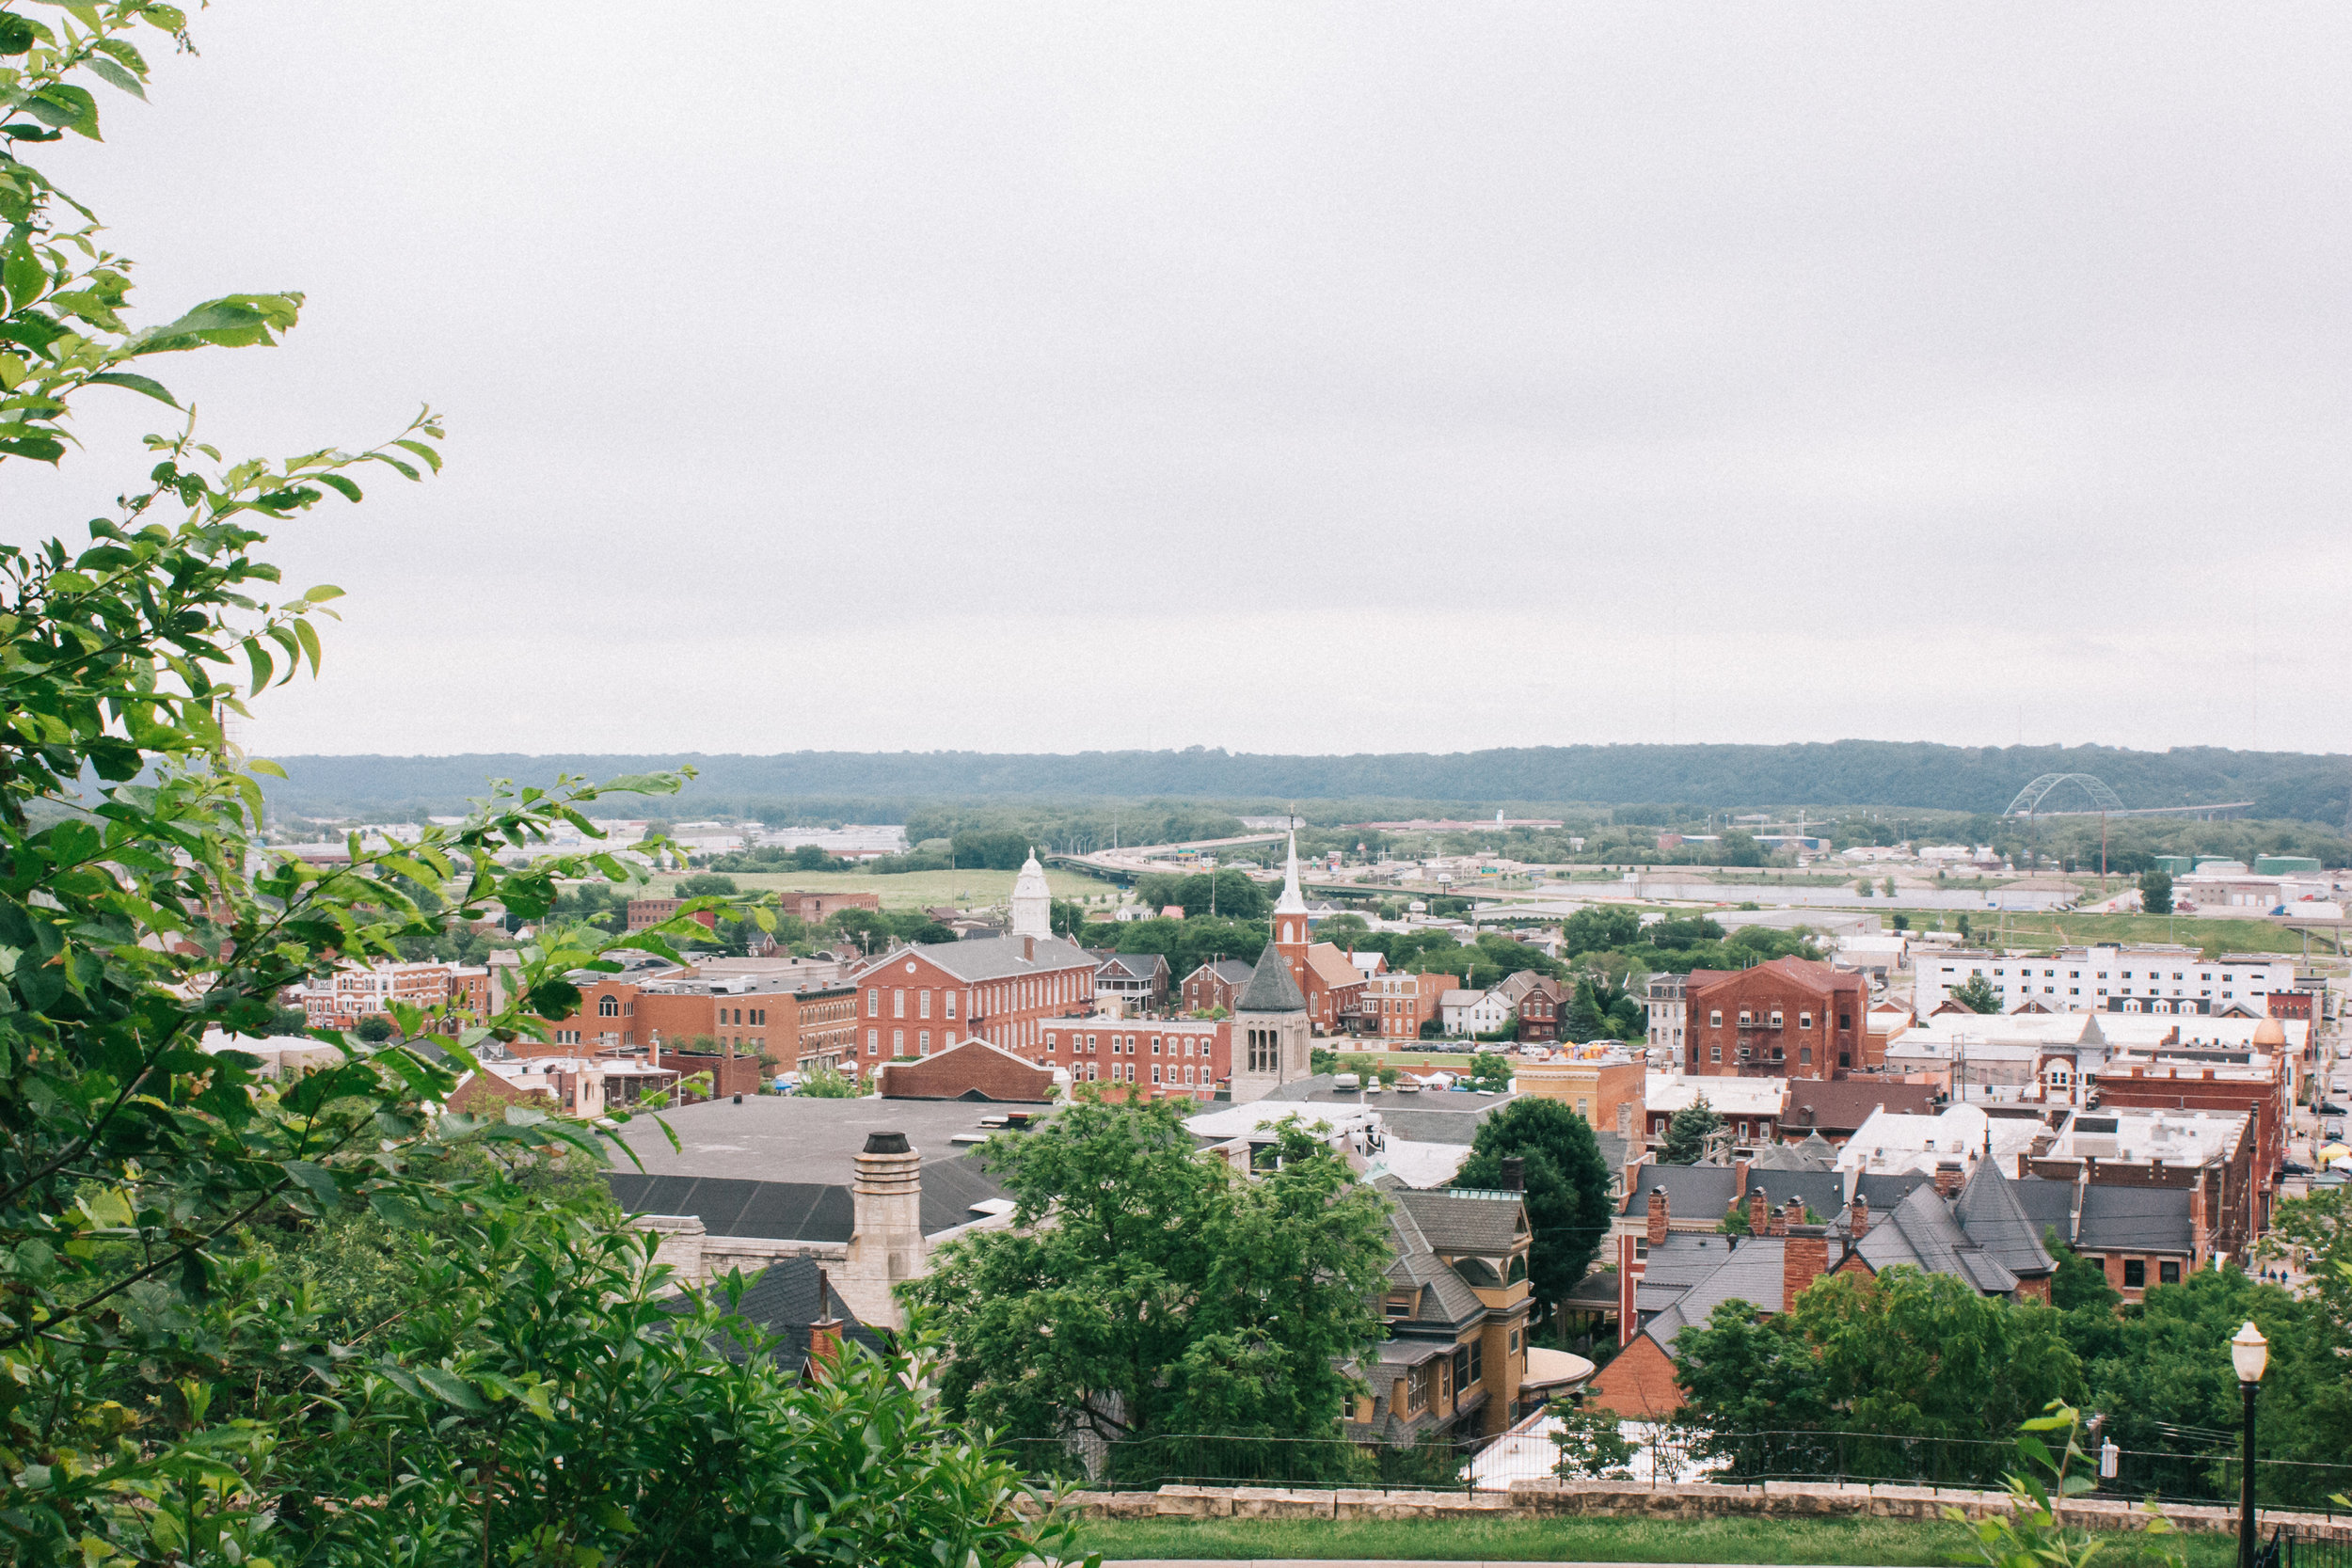 Overlooking downtown Dubuque